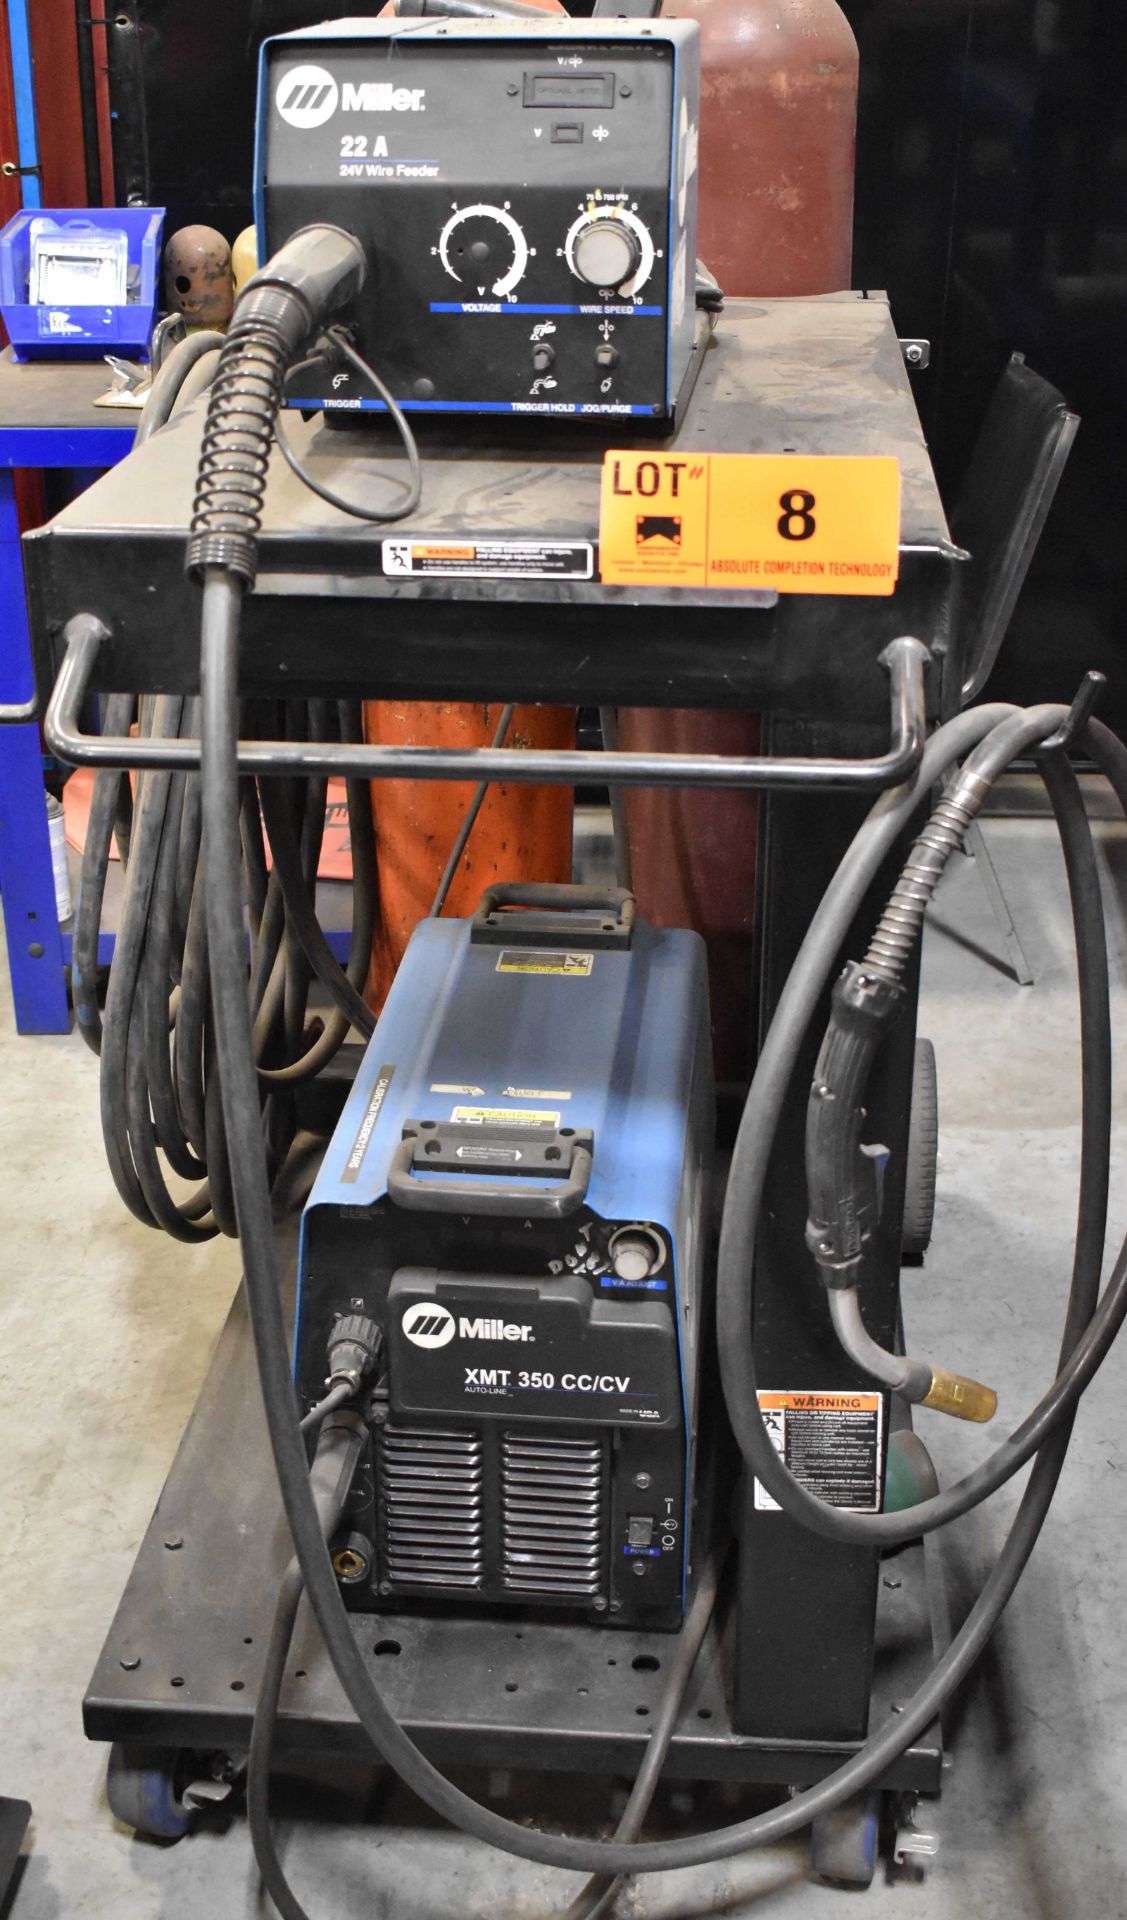 MILLER XMT 350 MIG WELDER WITH MILLER 22A WIRE FEEDER, CABLES & GUN, S/N: N/A [RIGGING FEES FOR